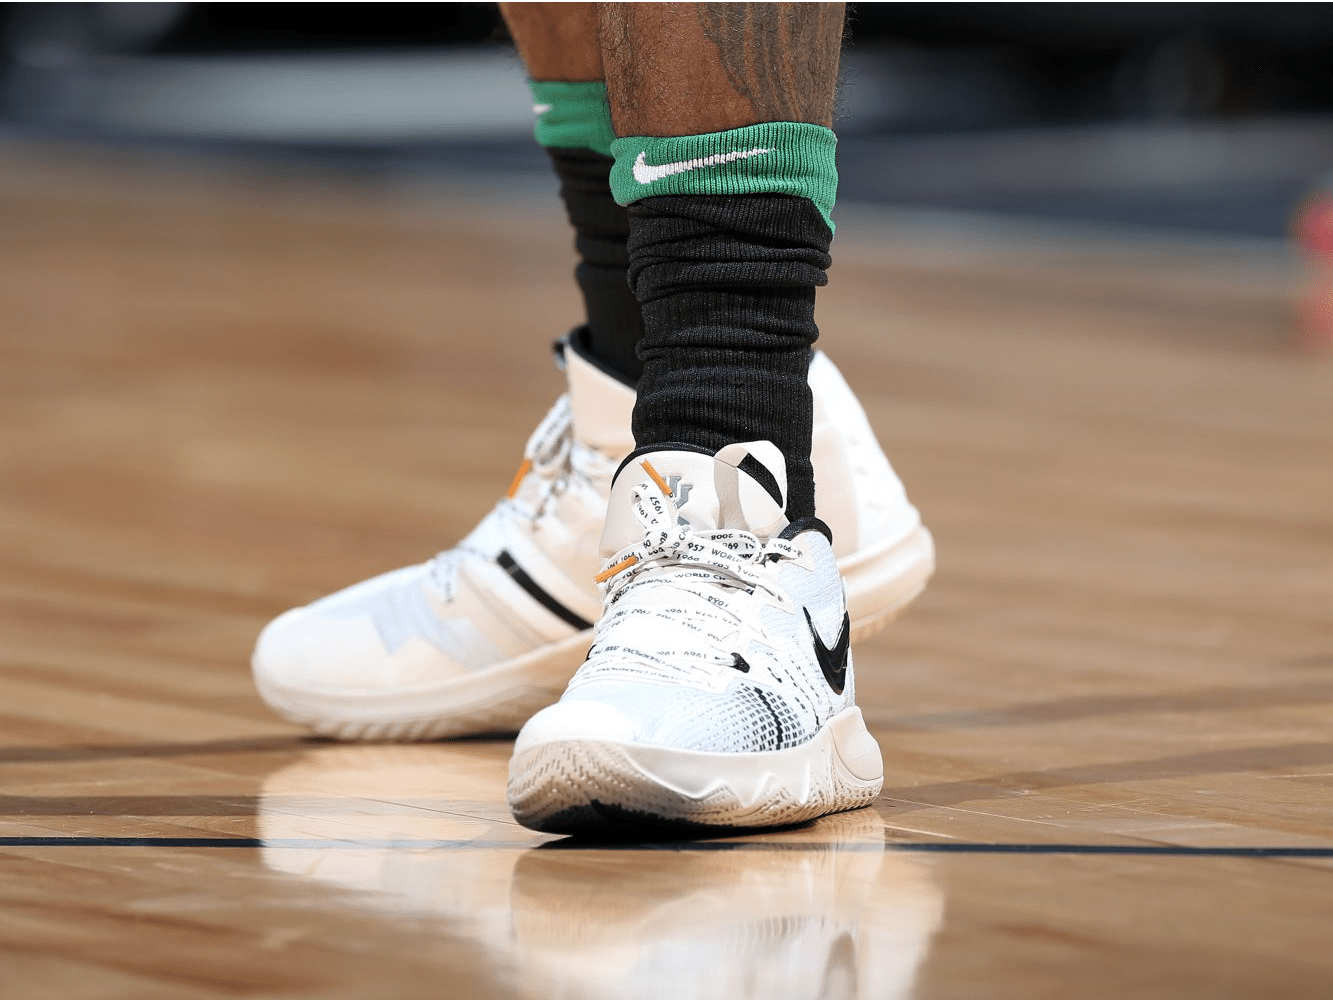 Which NBA player had the best sneakers 